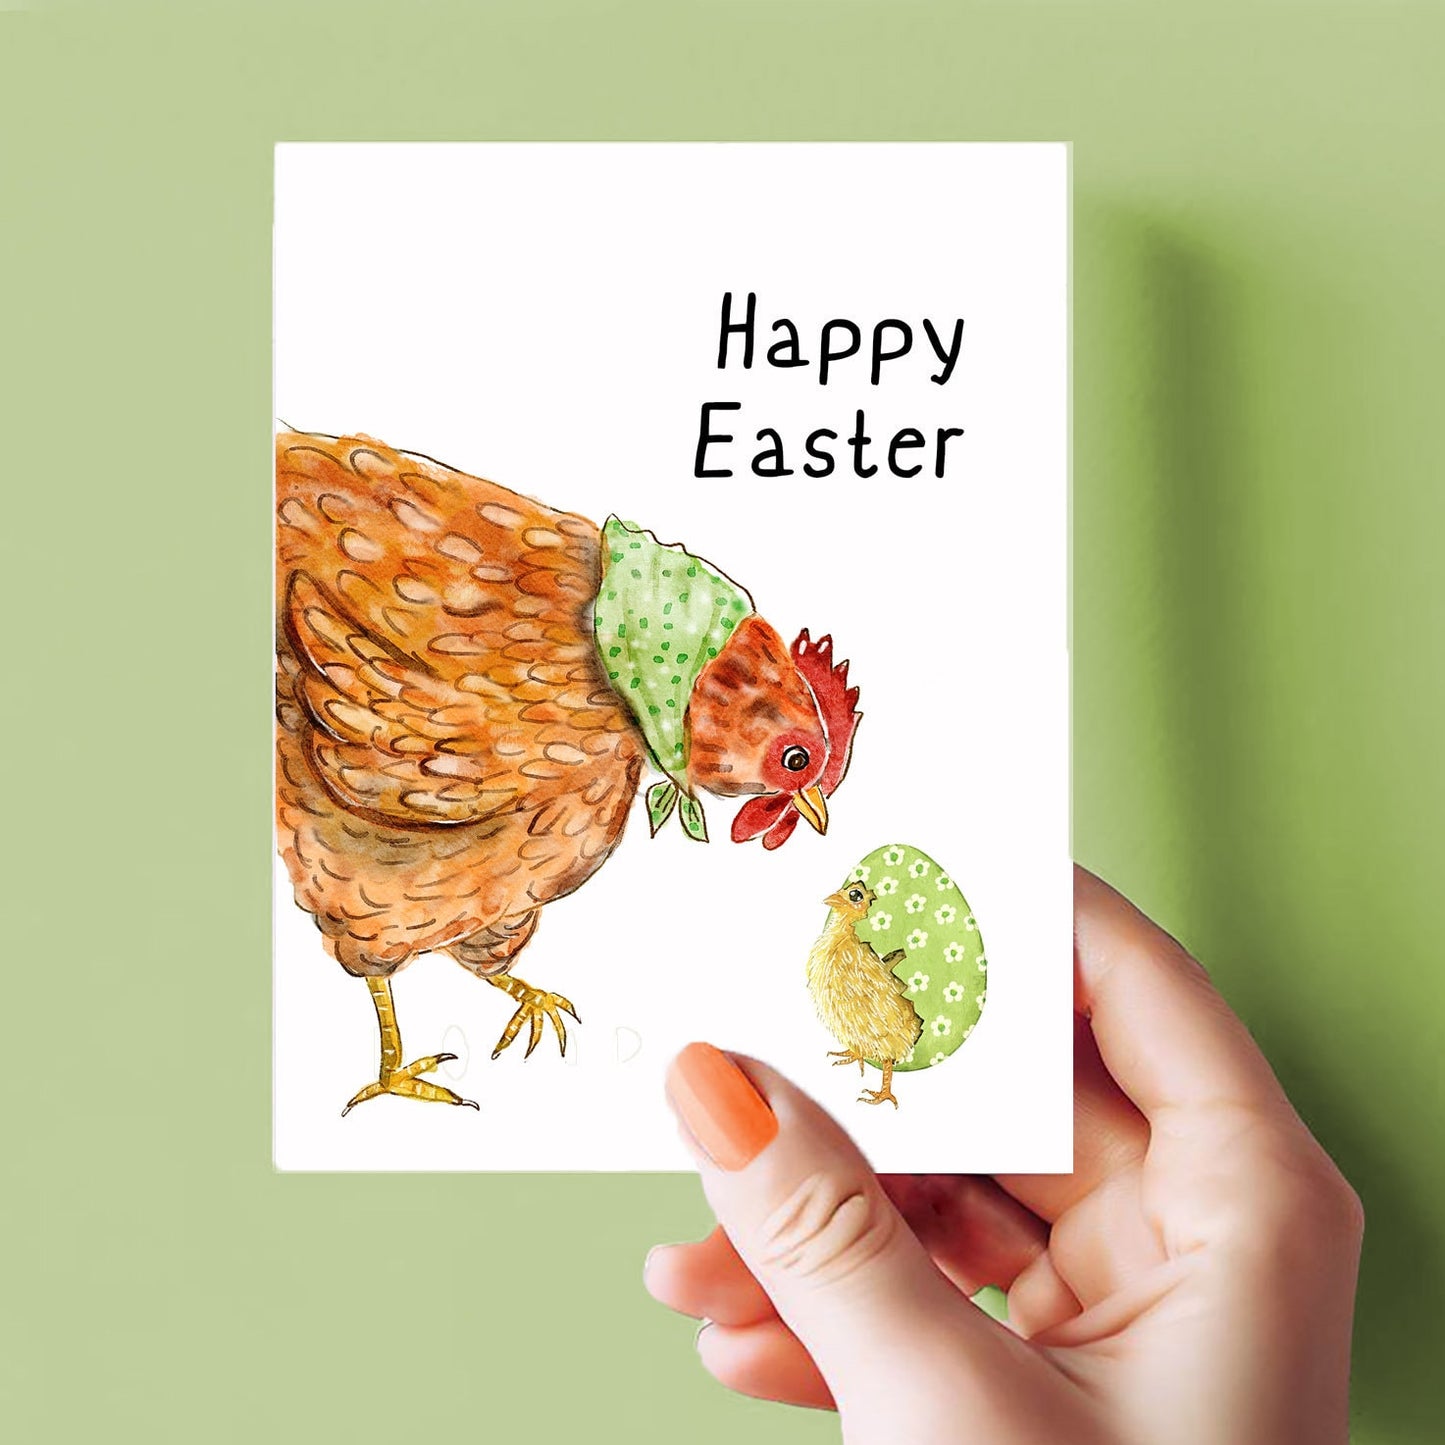 Spring Chicken Easter Eggs Card - Funny Easter Cards For Kids - Liyana Studio Greeting Cards Handmade